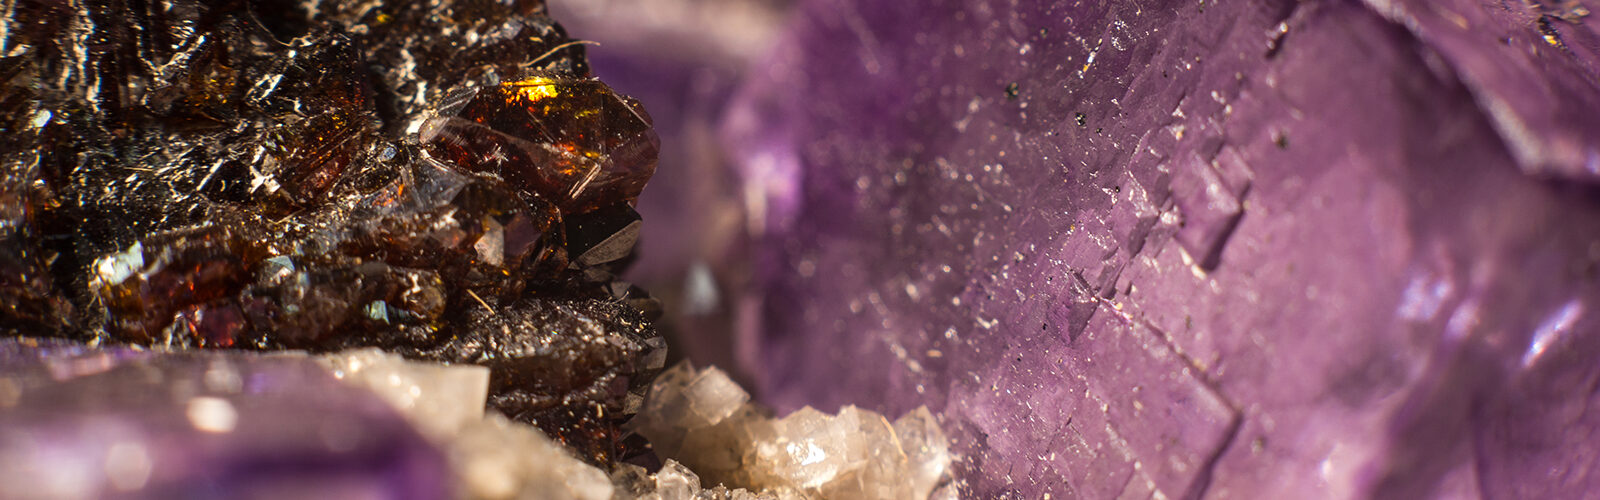 A close-up view of purple crystals.